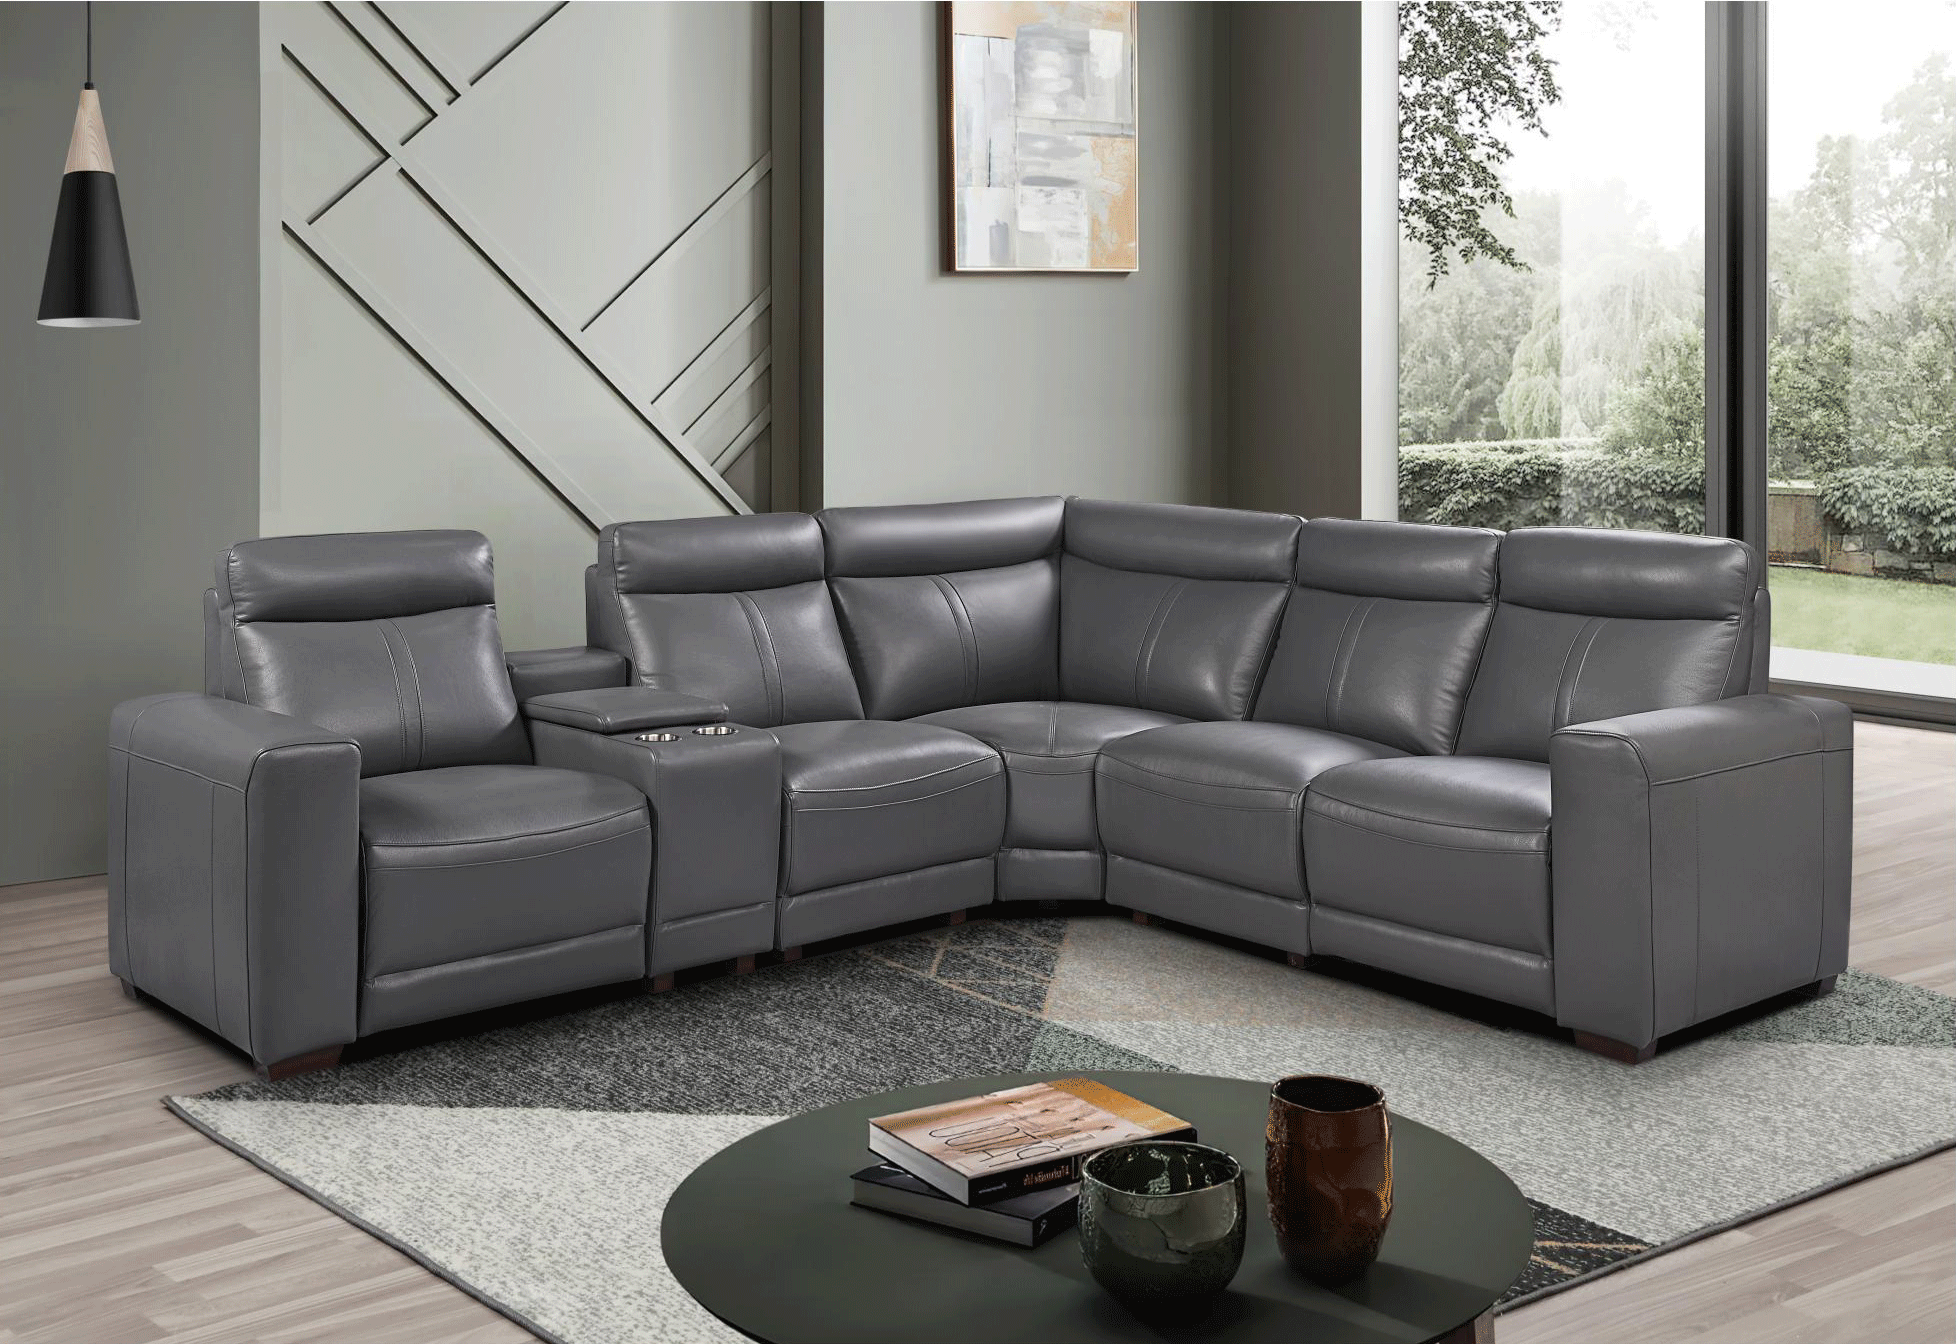 Brands IR Living Collection 2777 Sectional w/ recliners